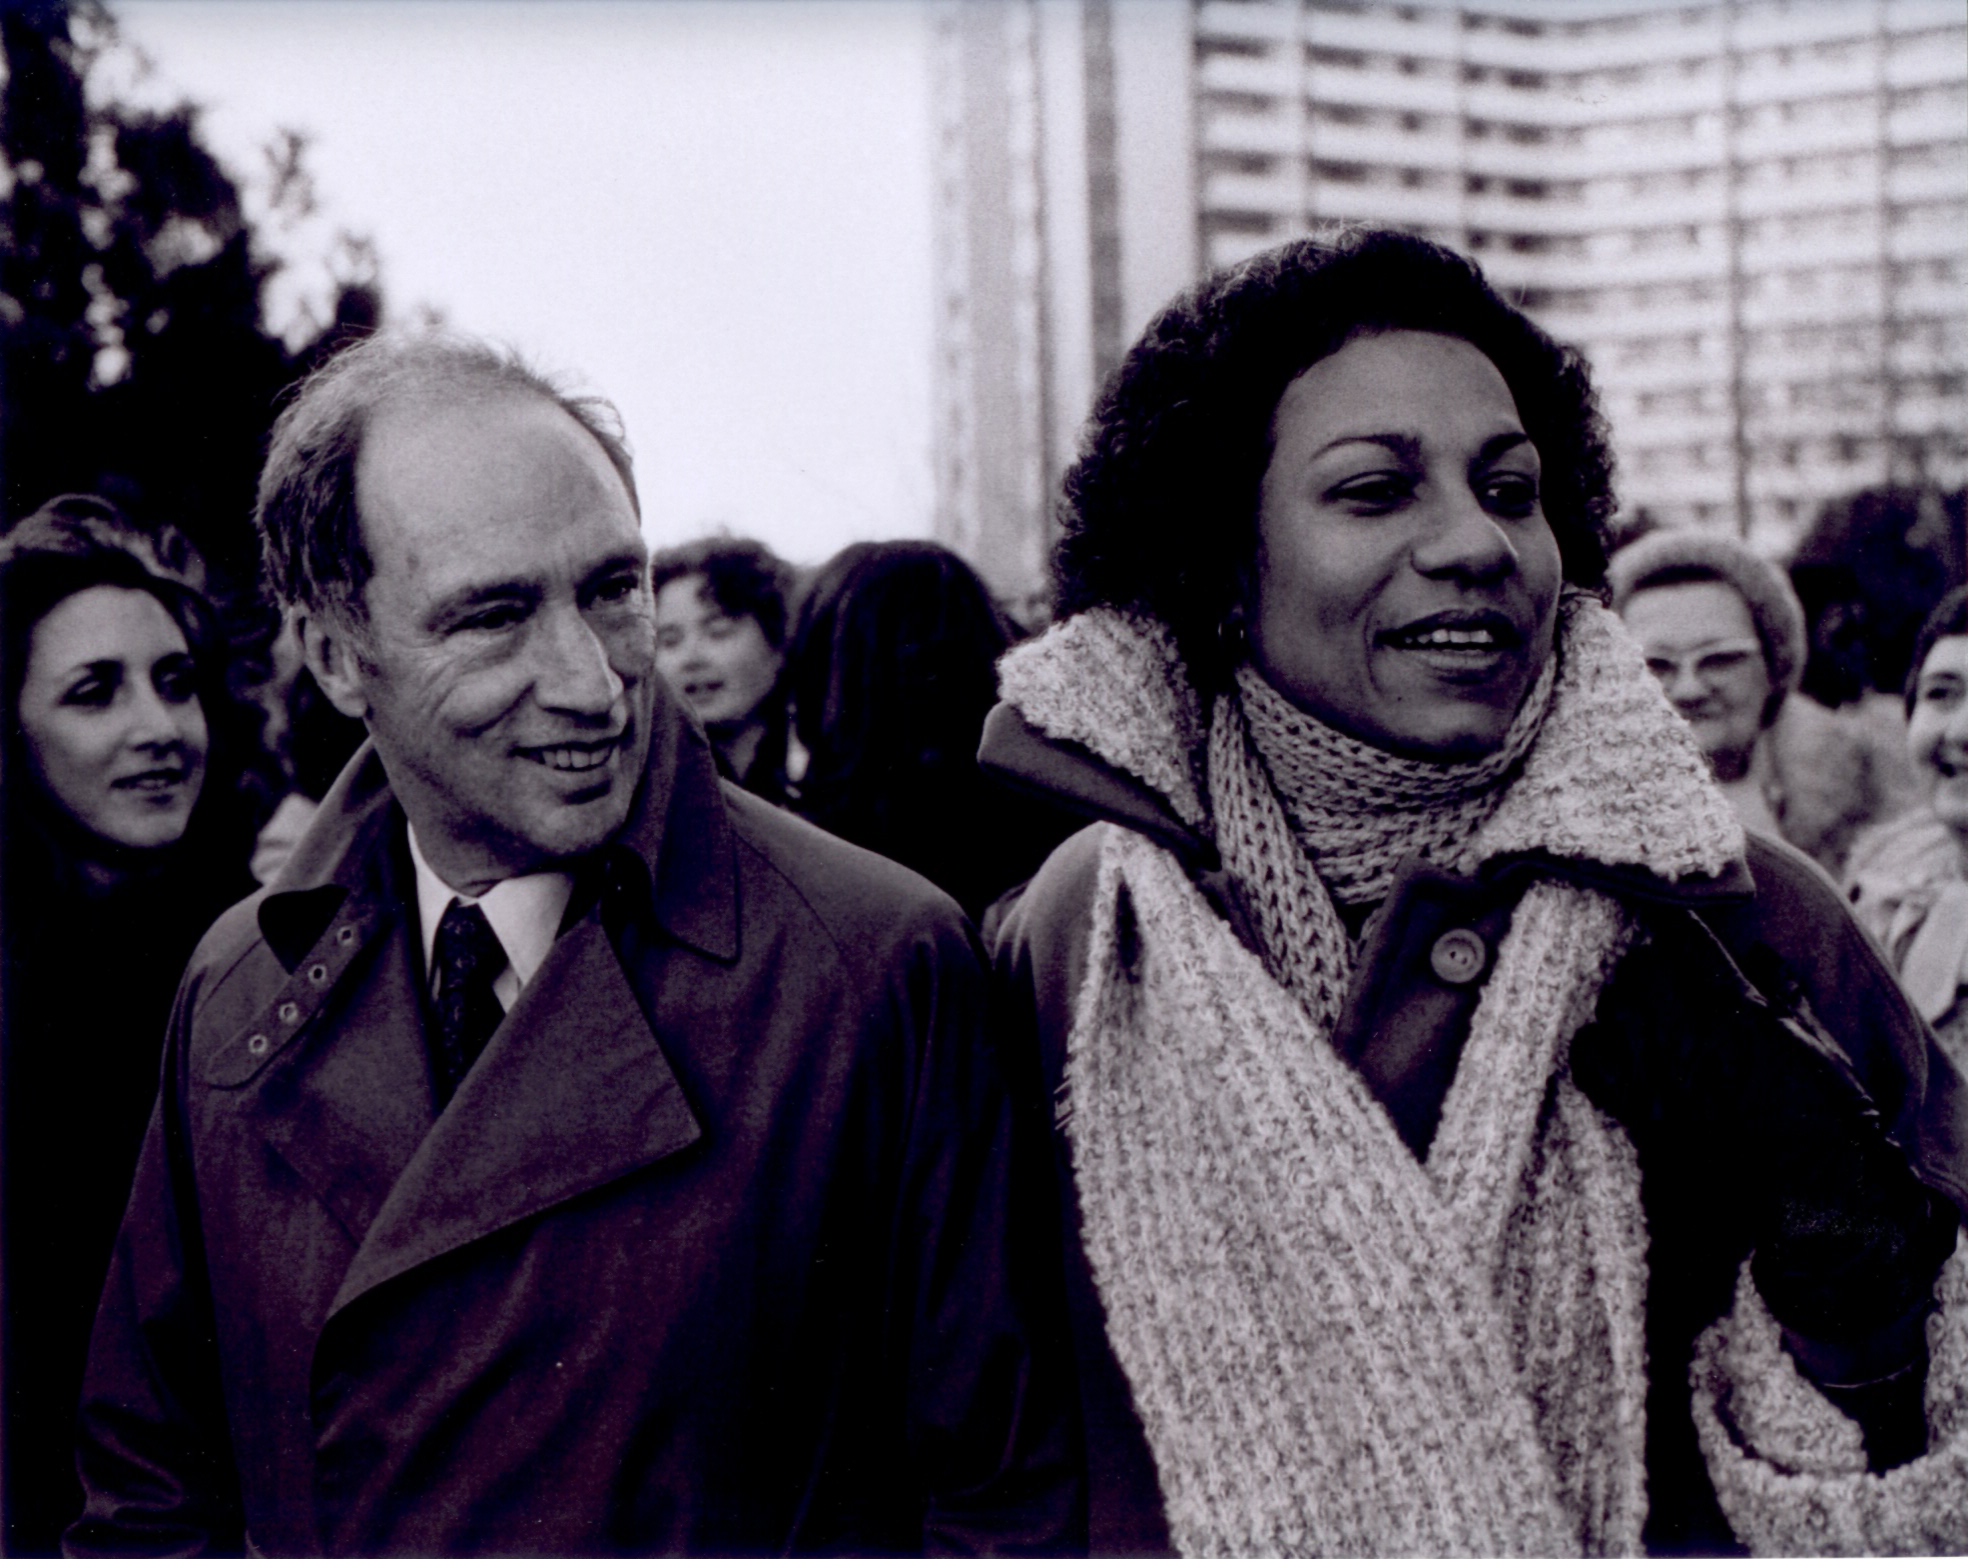 Senator Cools on the campaign trail with Prime Minister Pierre Elliott Trudeau in 1980. Prime Minister Trudeau would appoint Cools to the Senate on January 13, 1984.